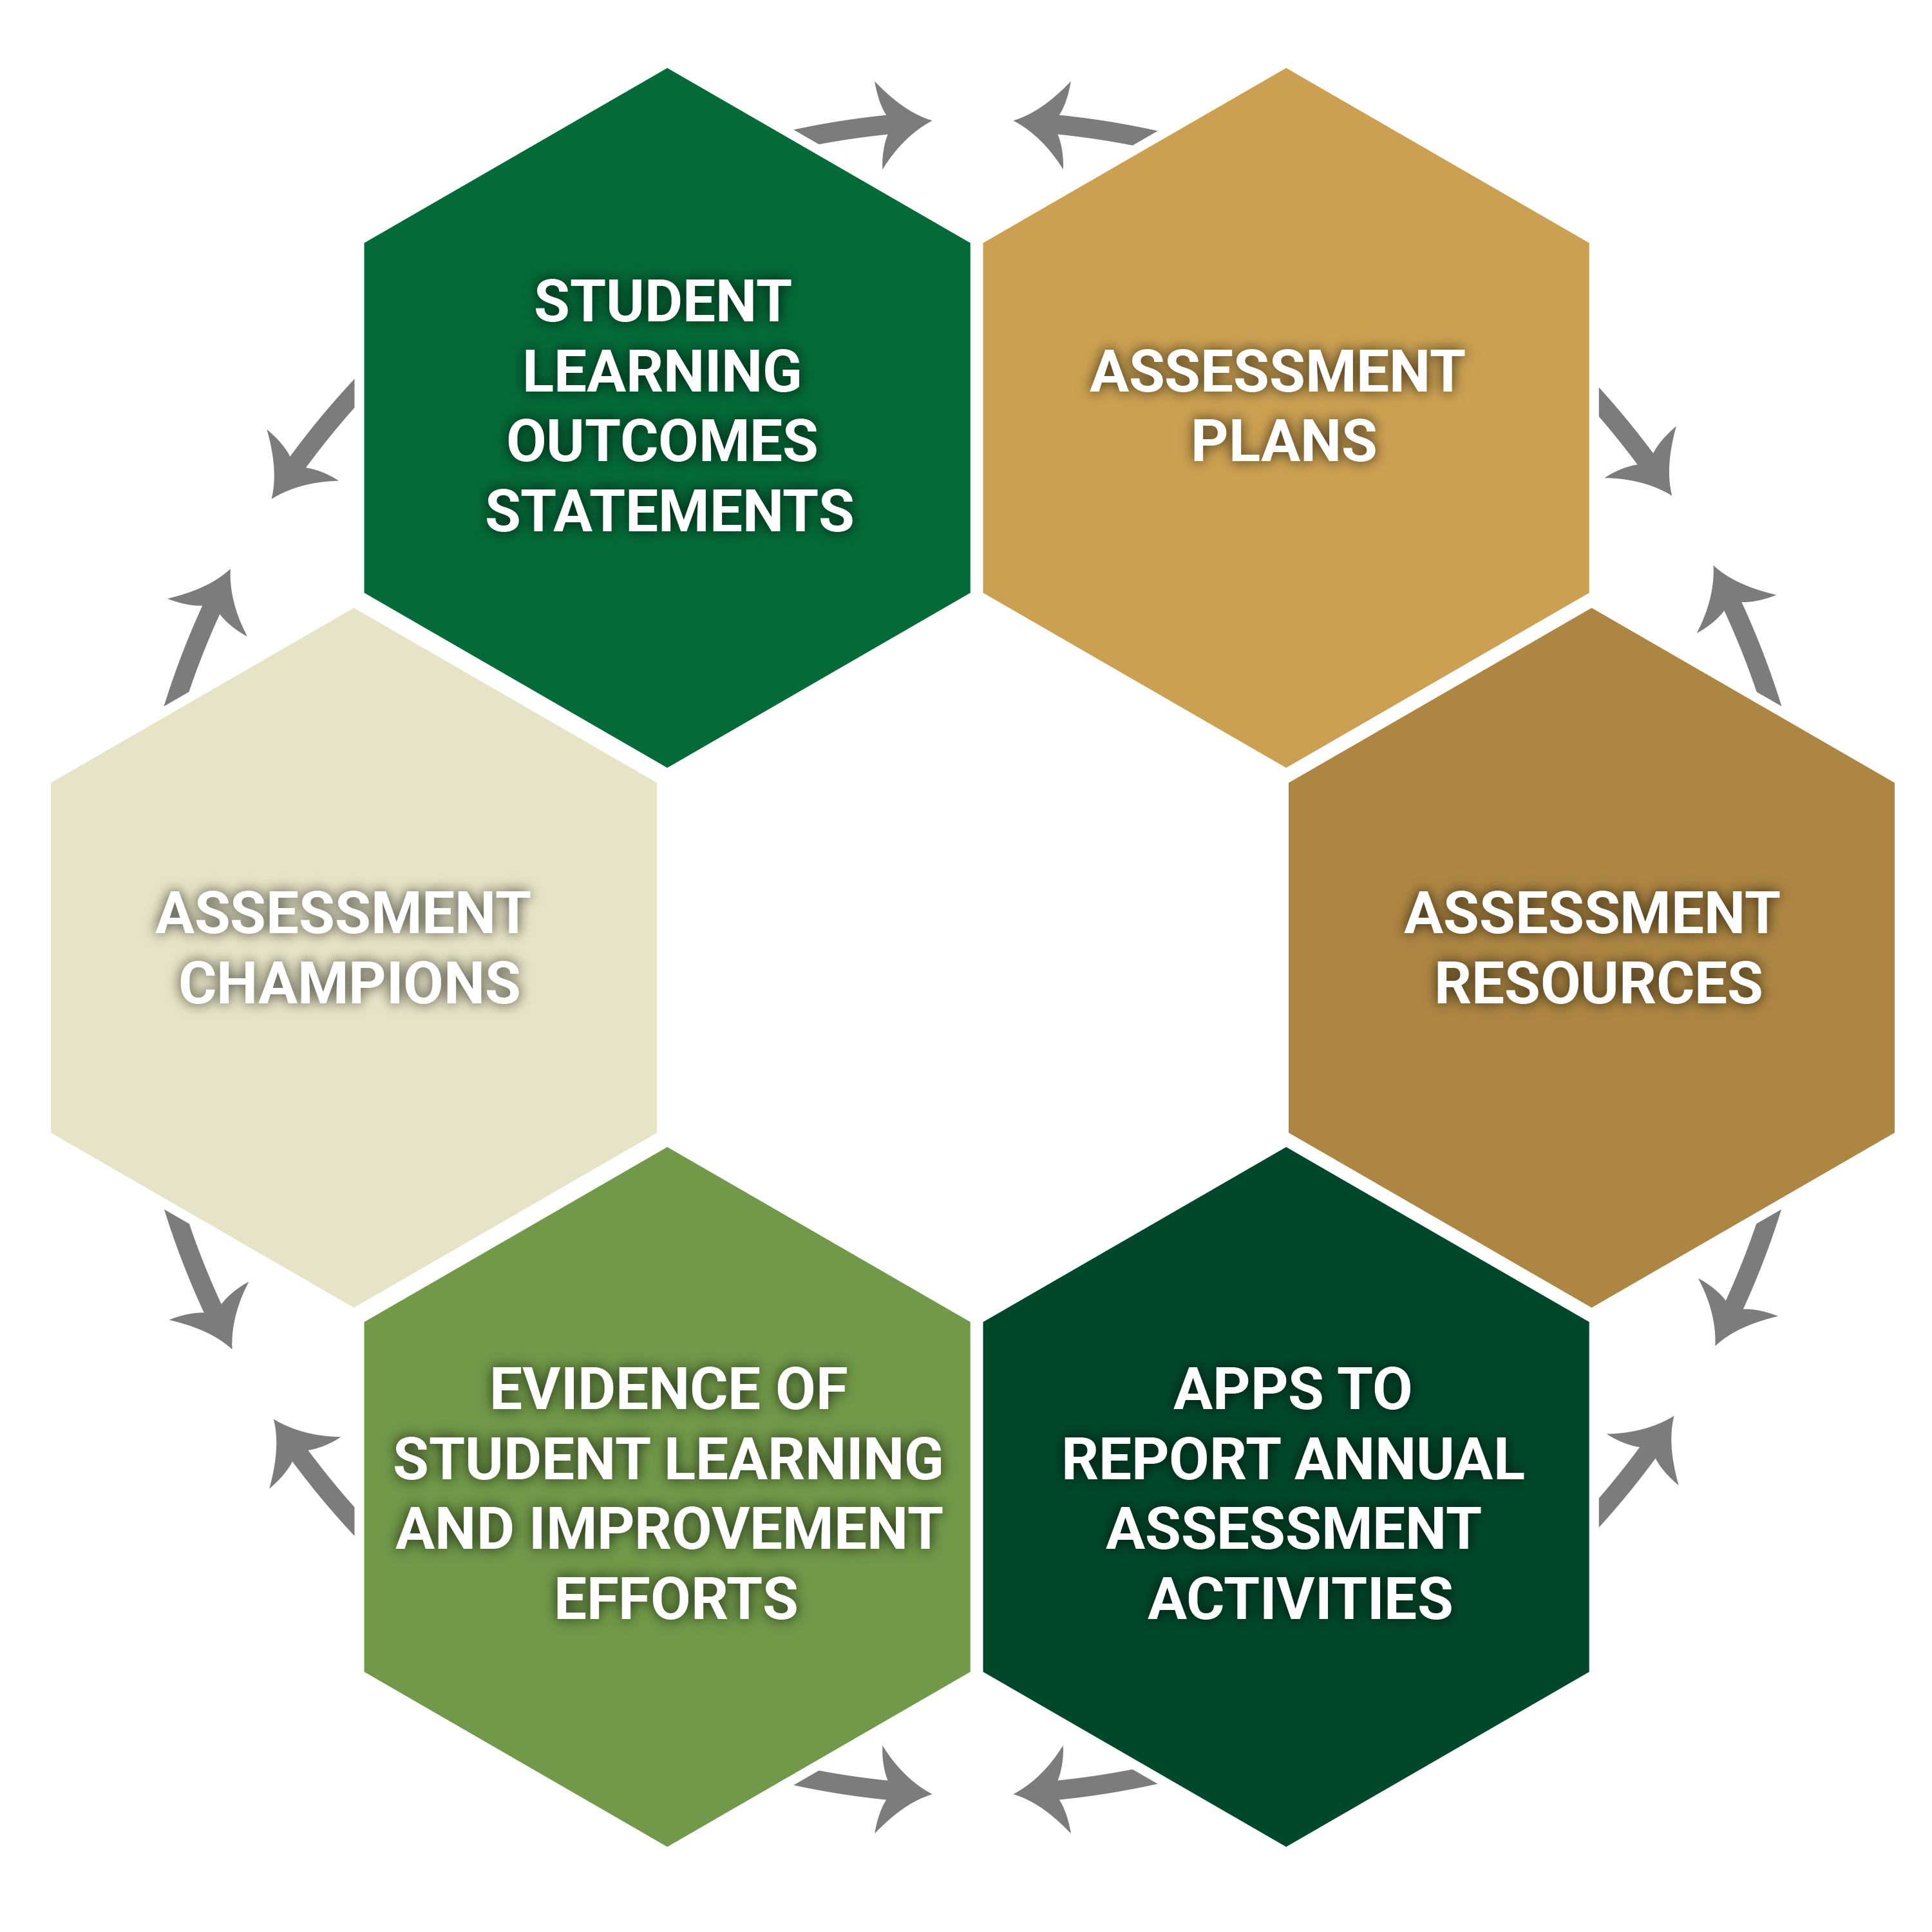 Steps involved in the Student assessment learning process refer to explanation below for each step